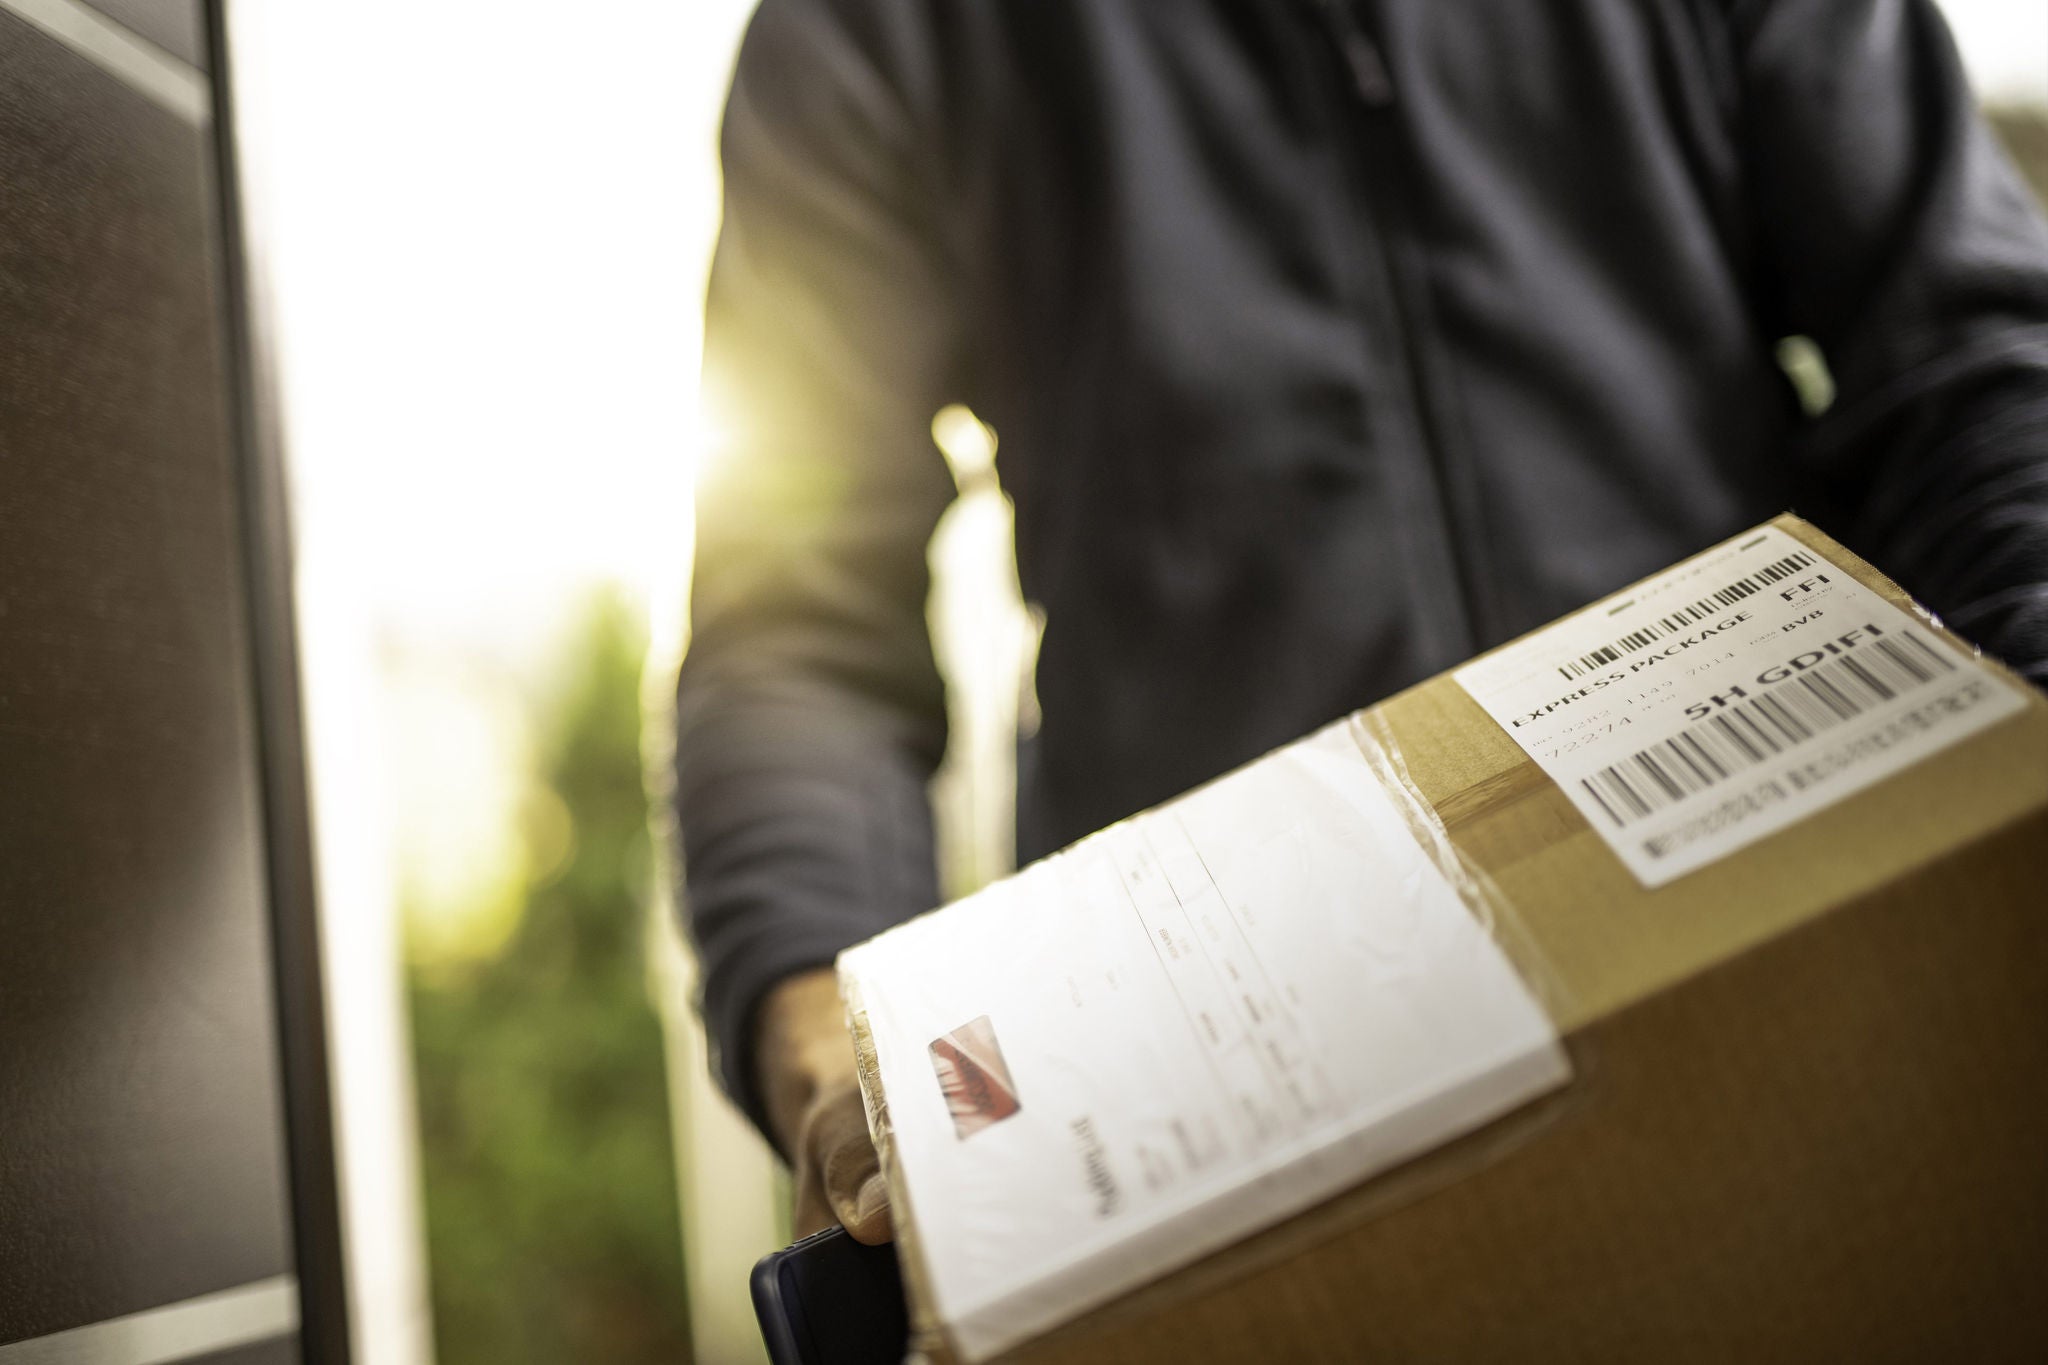 ey-courier-delivering-a-package